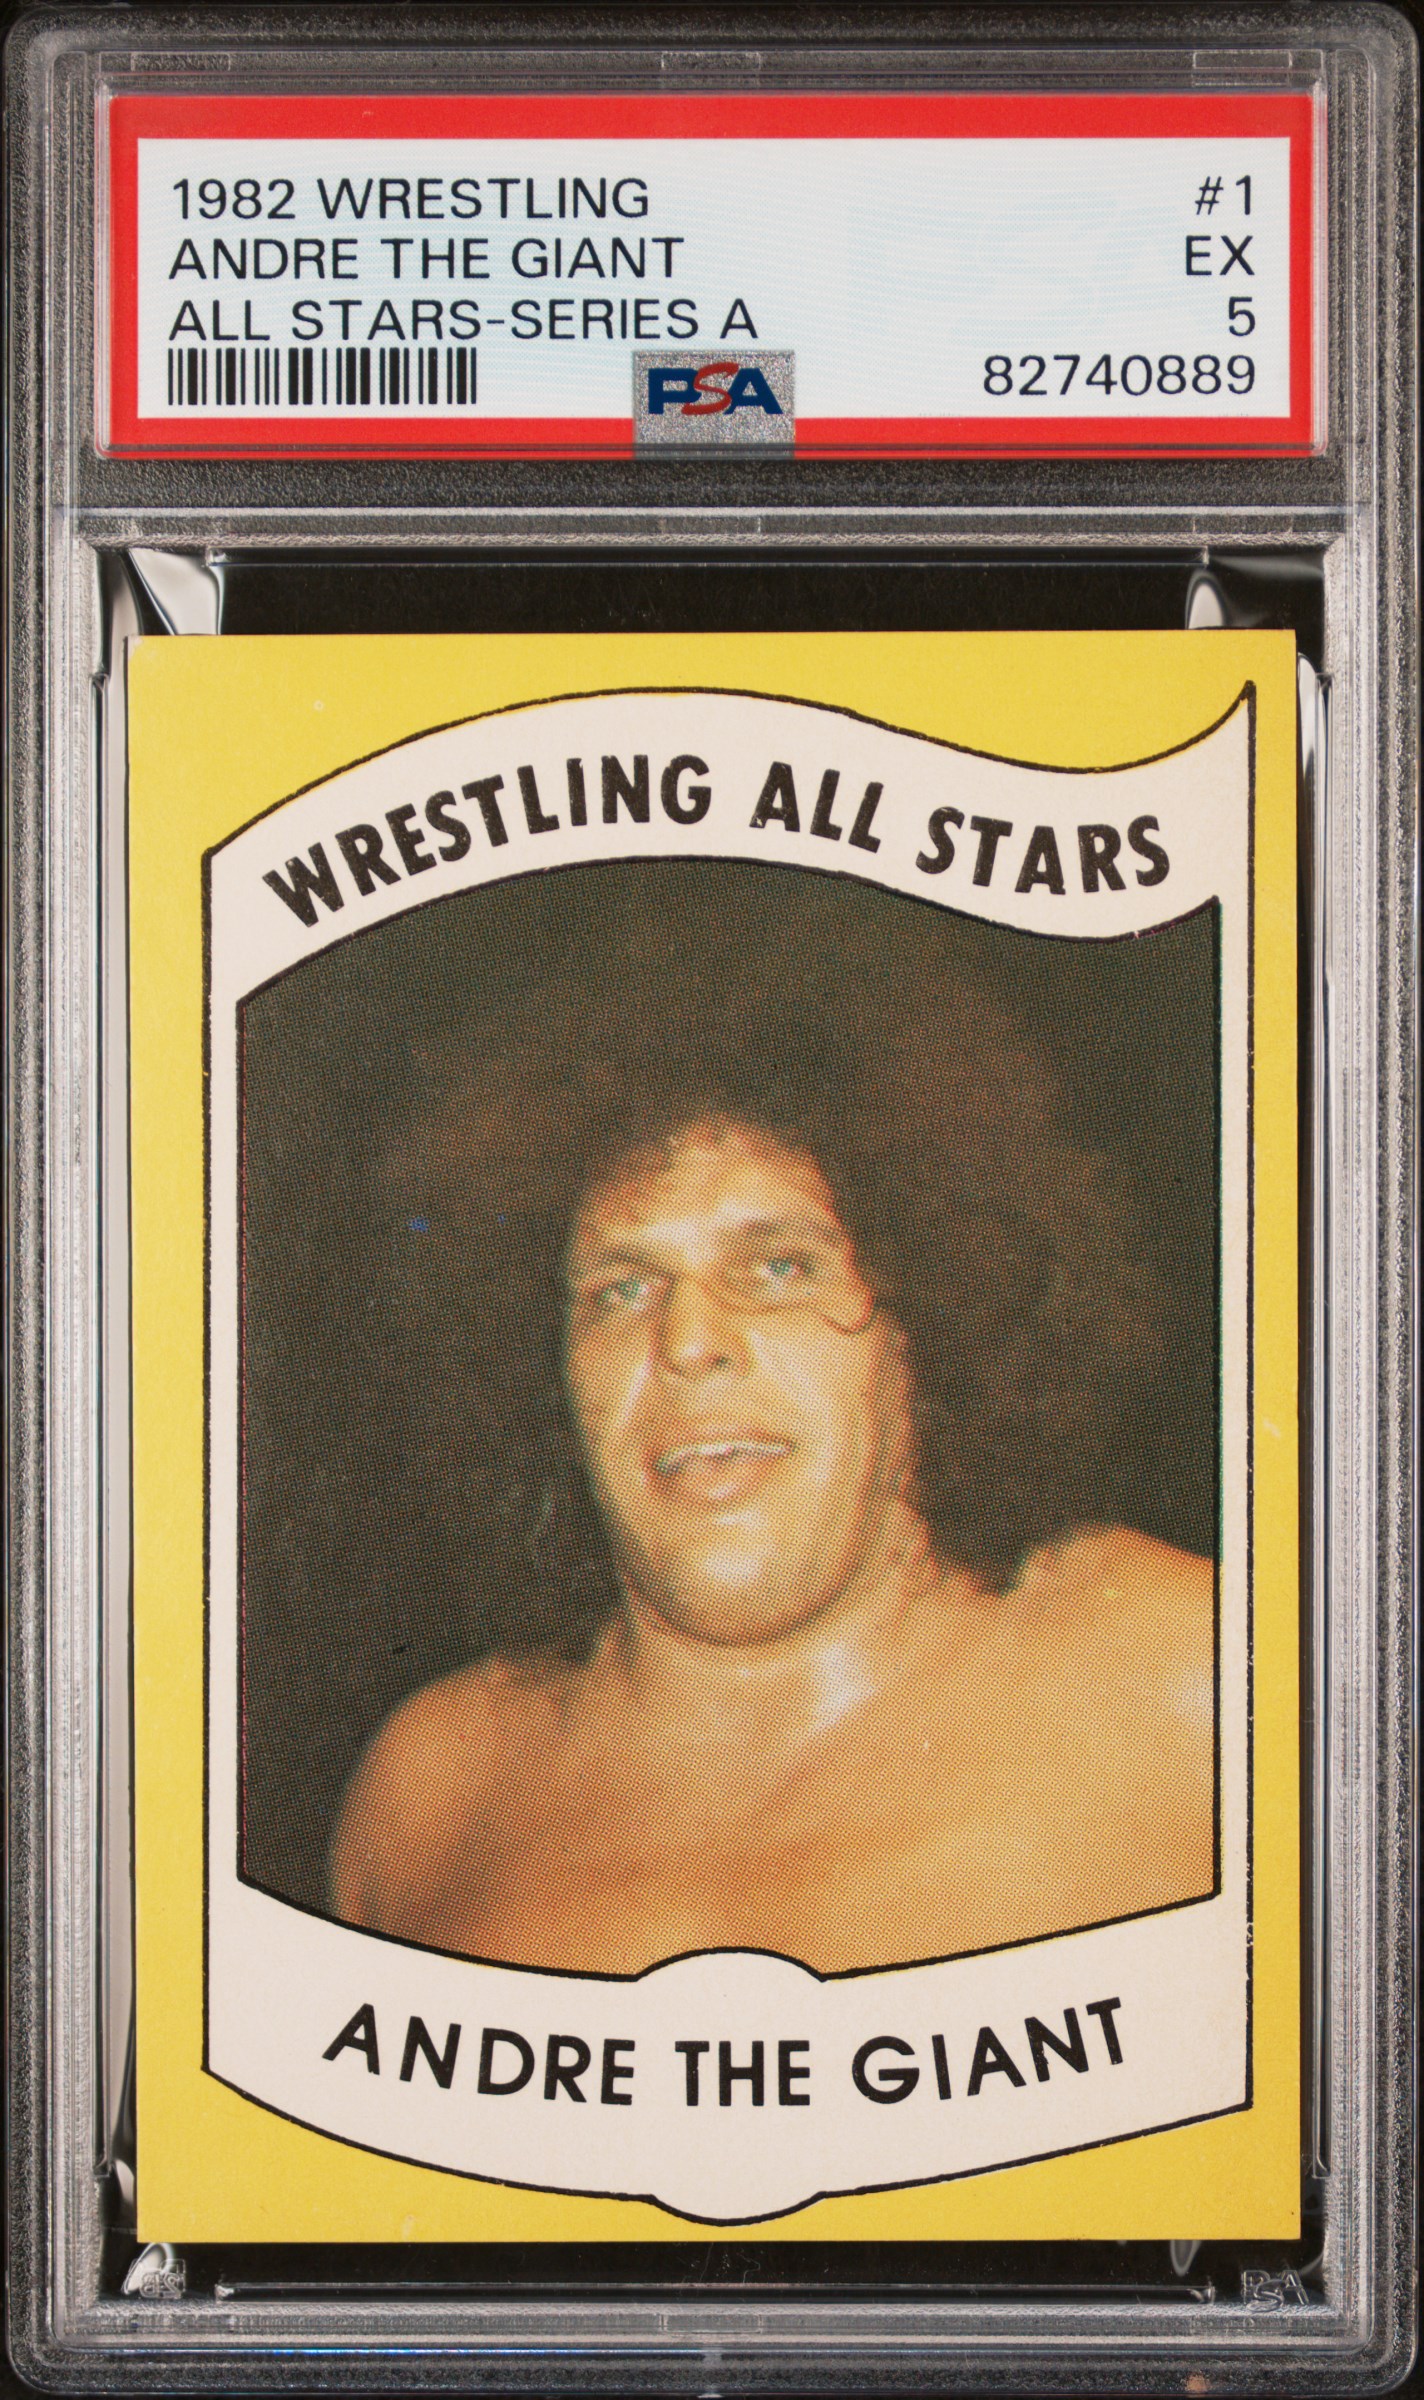 1982 Wrestling All-Stars Series A 1 Andre The Giant – PSA EX 5